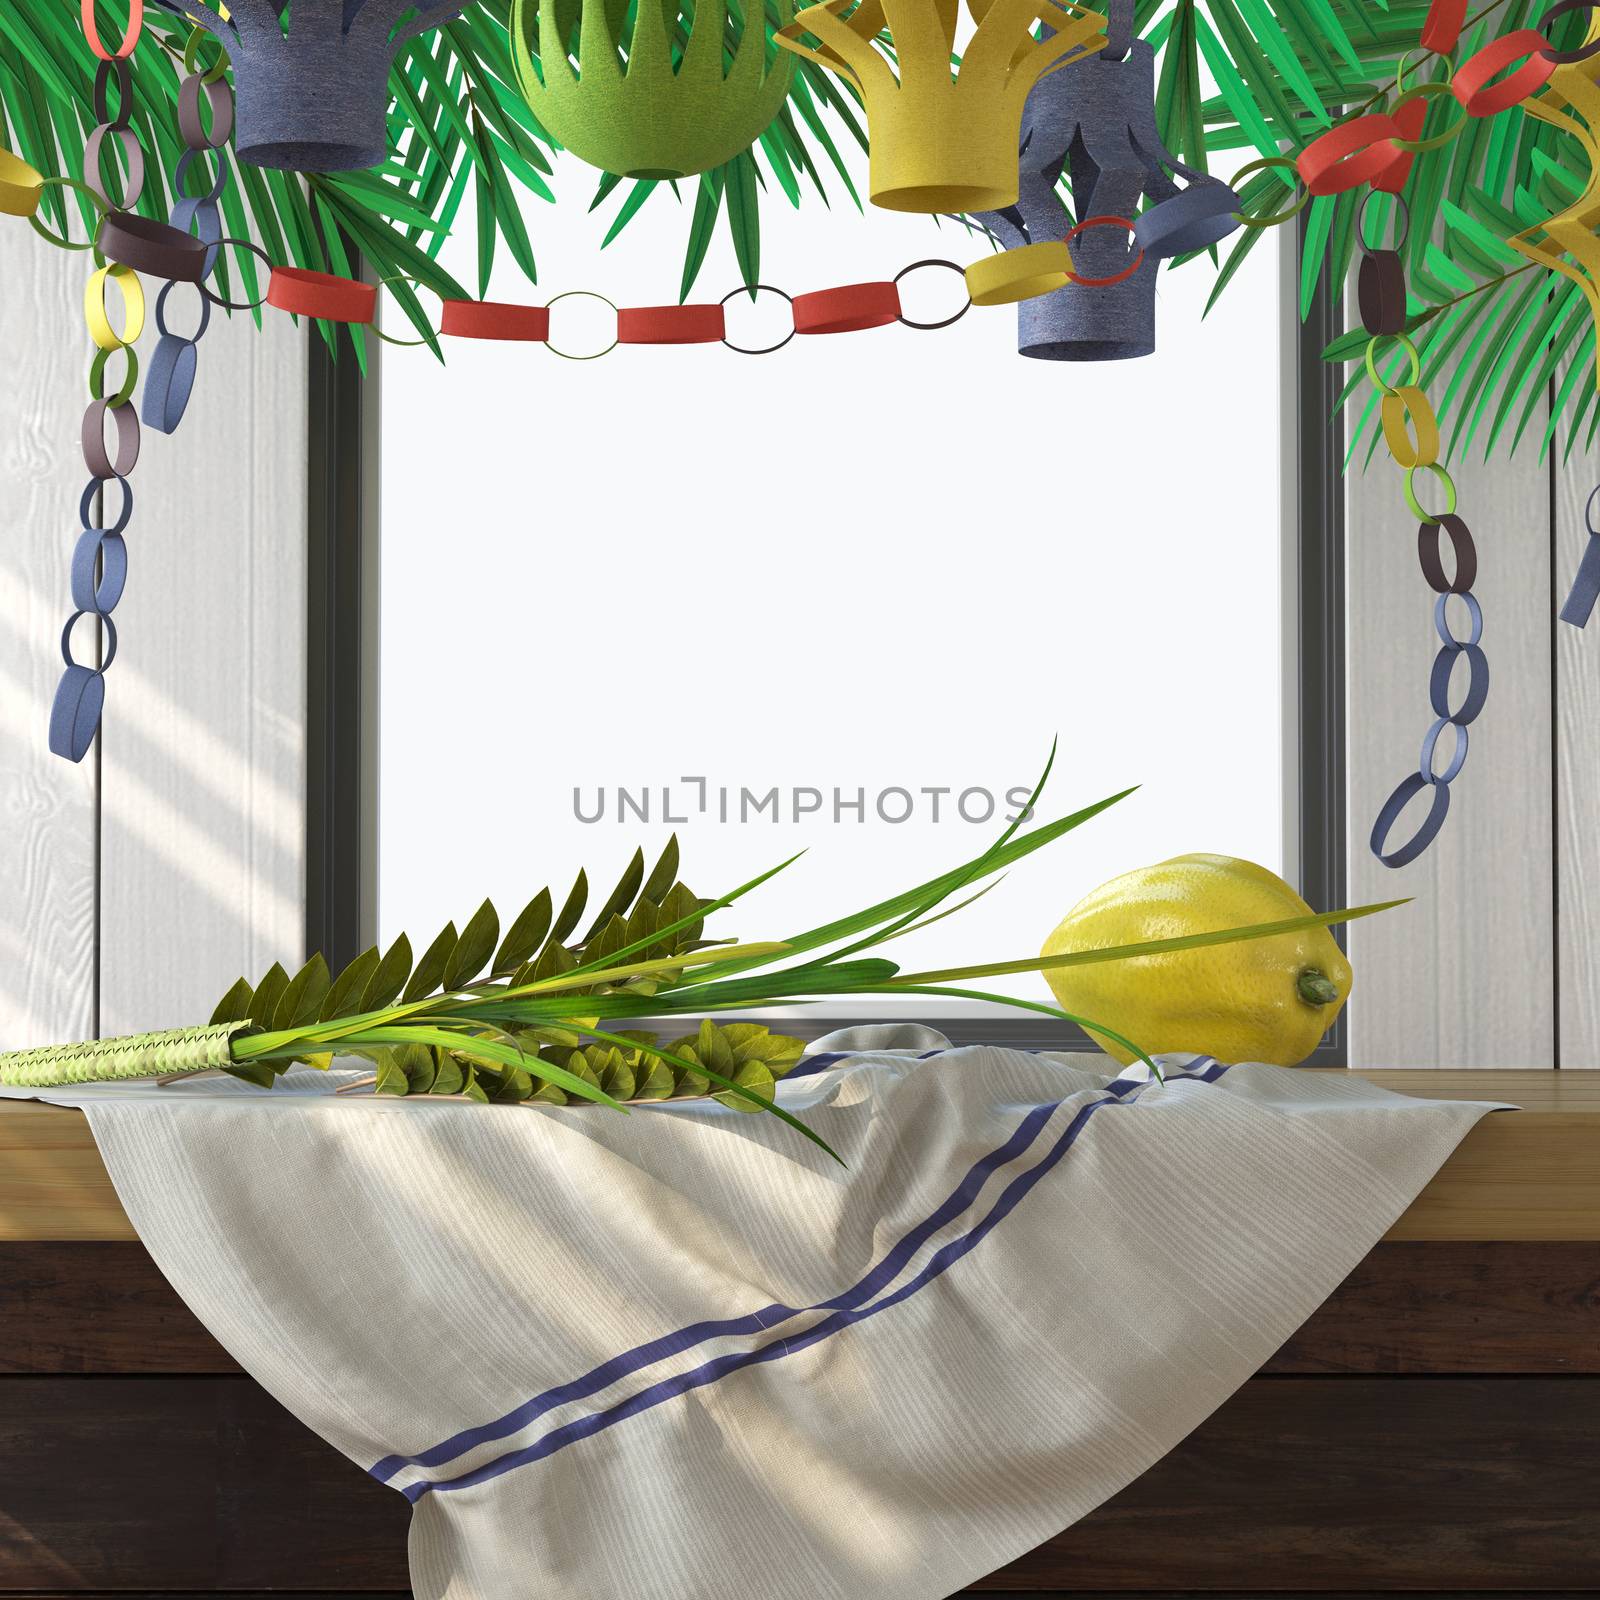 Symbols of the Jewish holiday Sukkot with palm leaves by denisgo